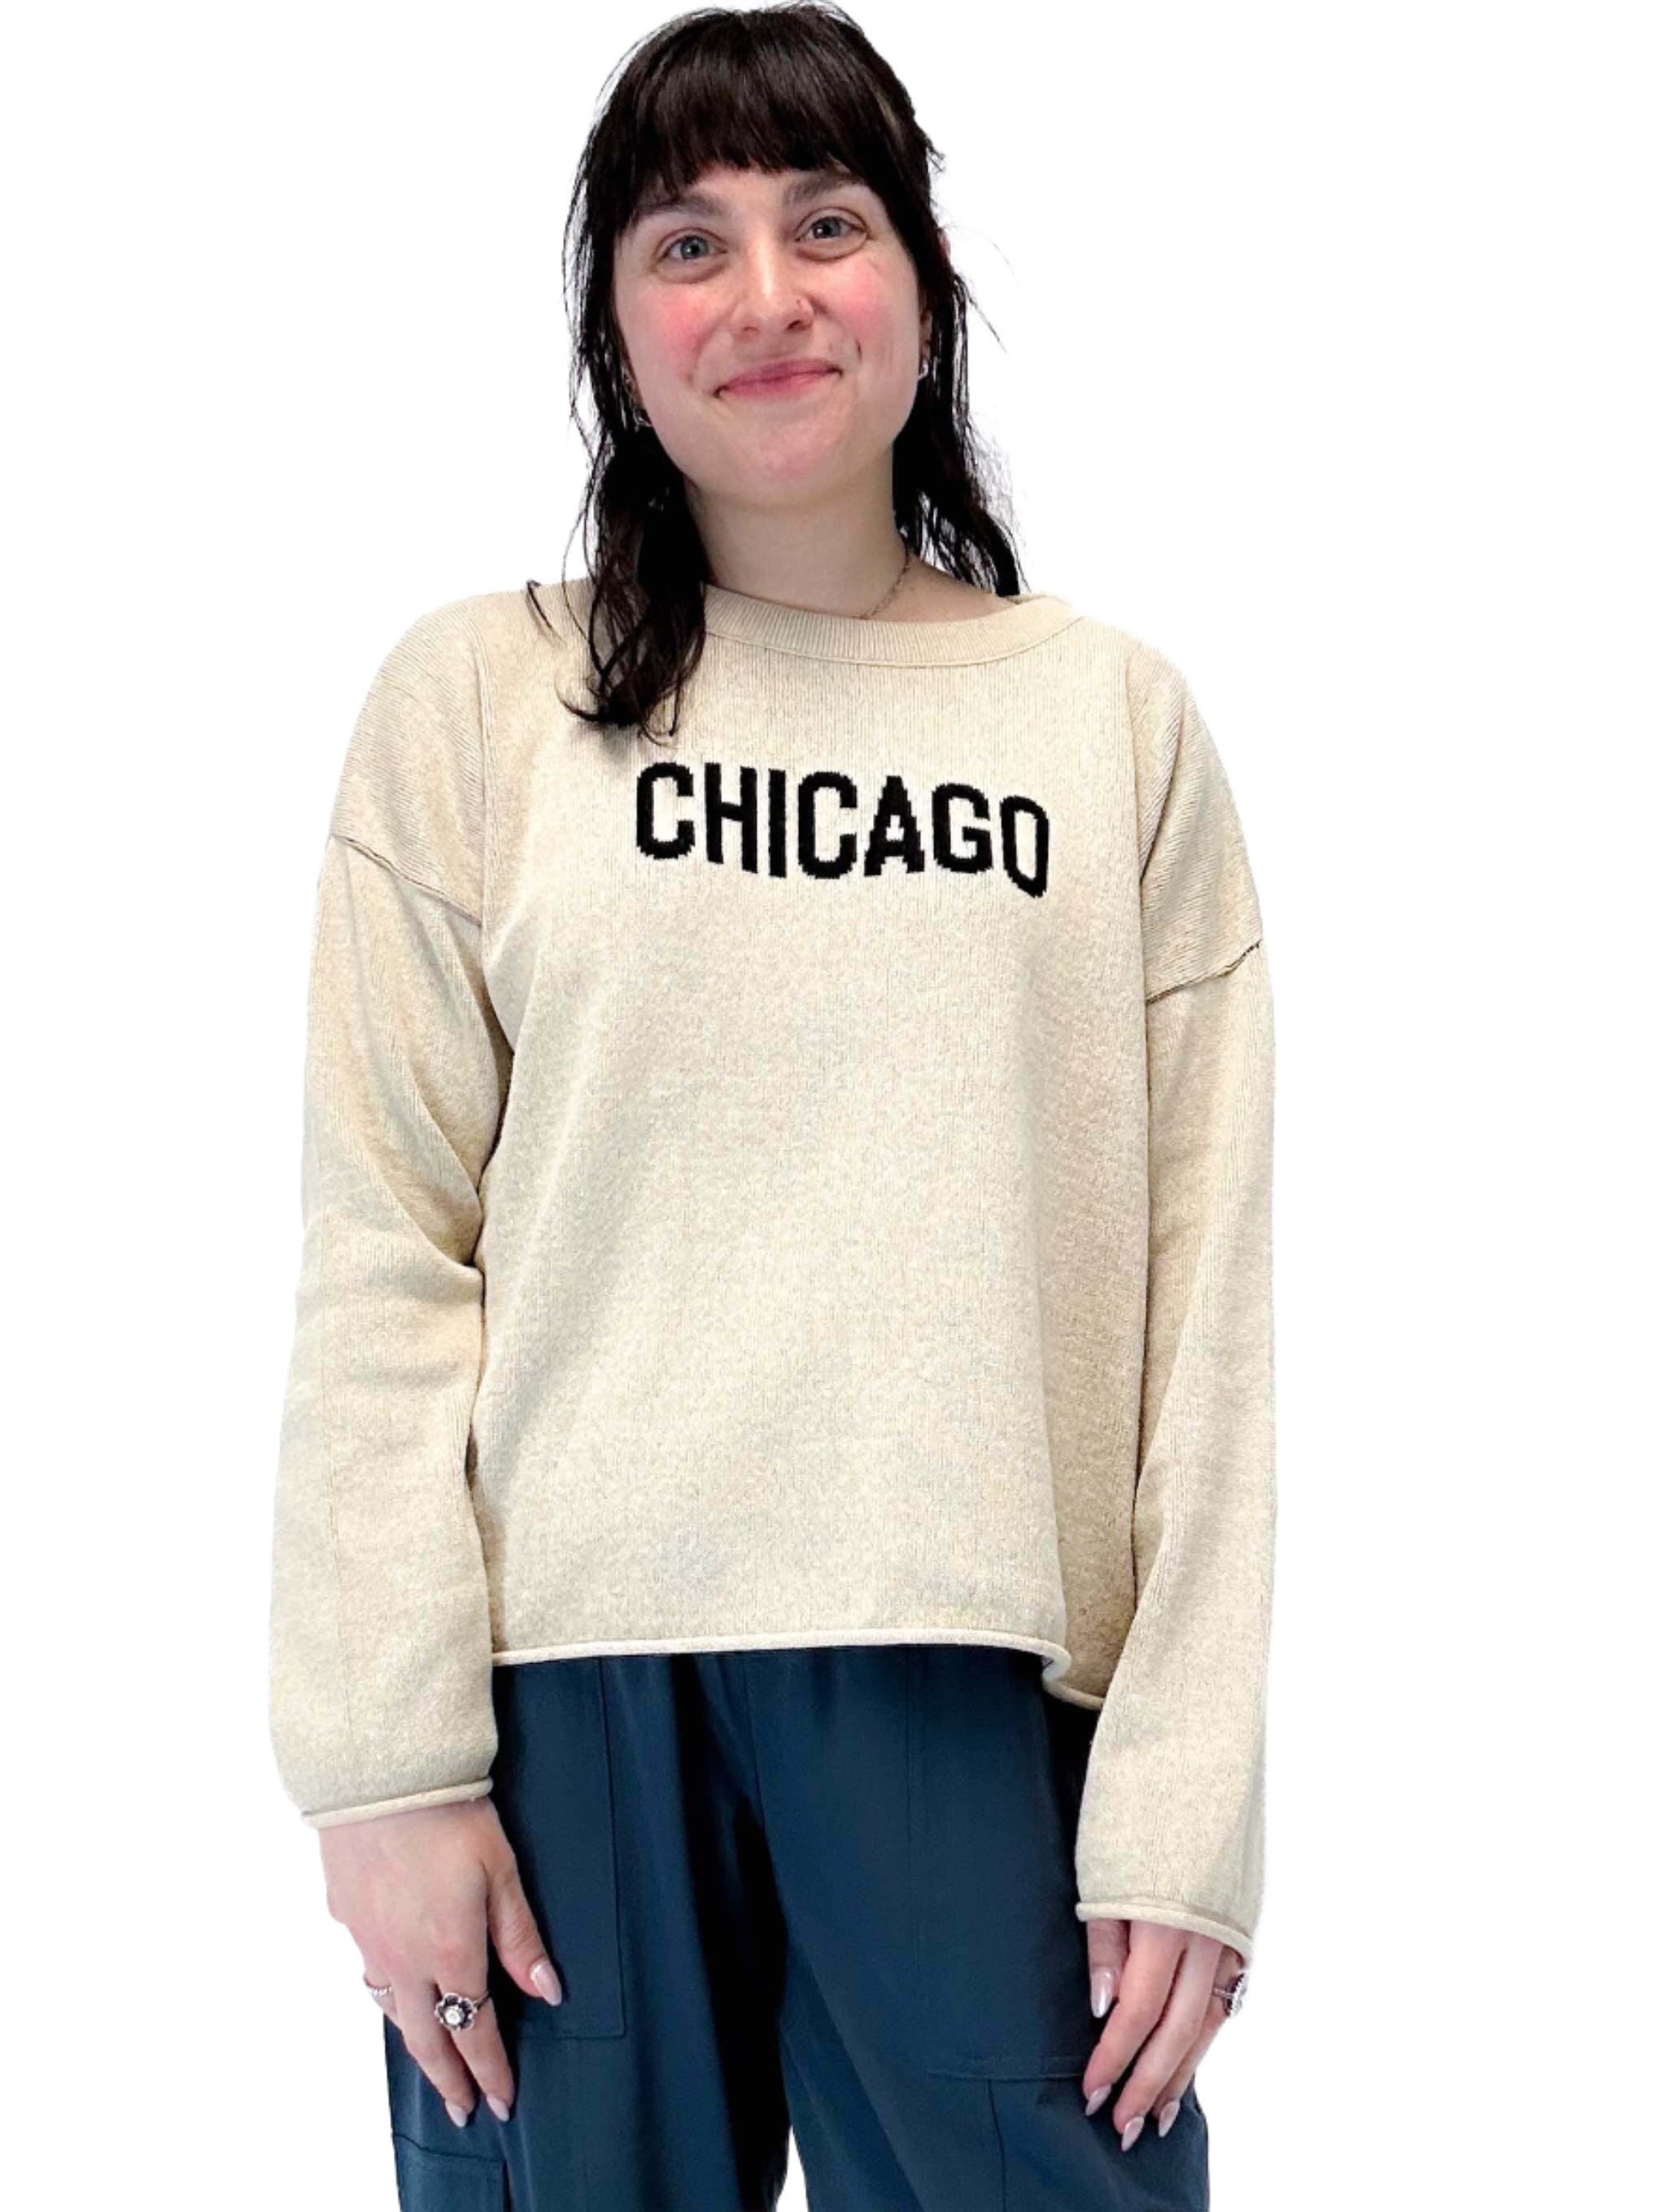 "Chicago" Boxy Sweater in Camel/Black